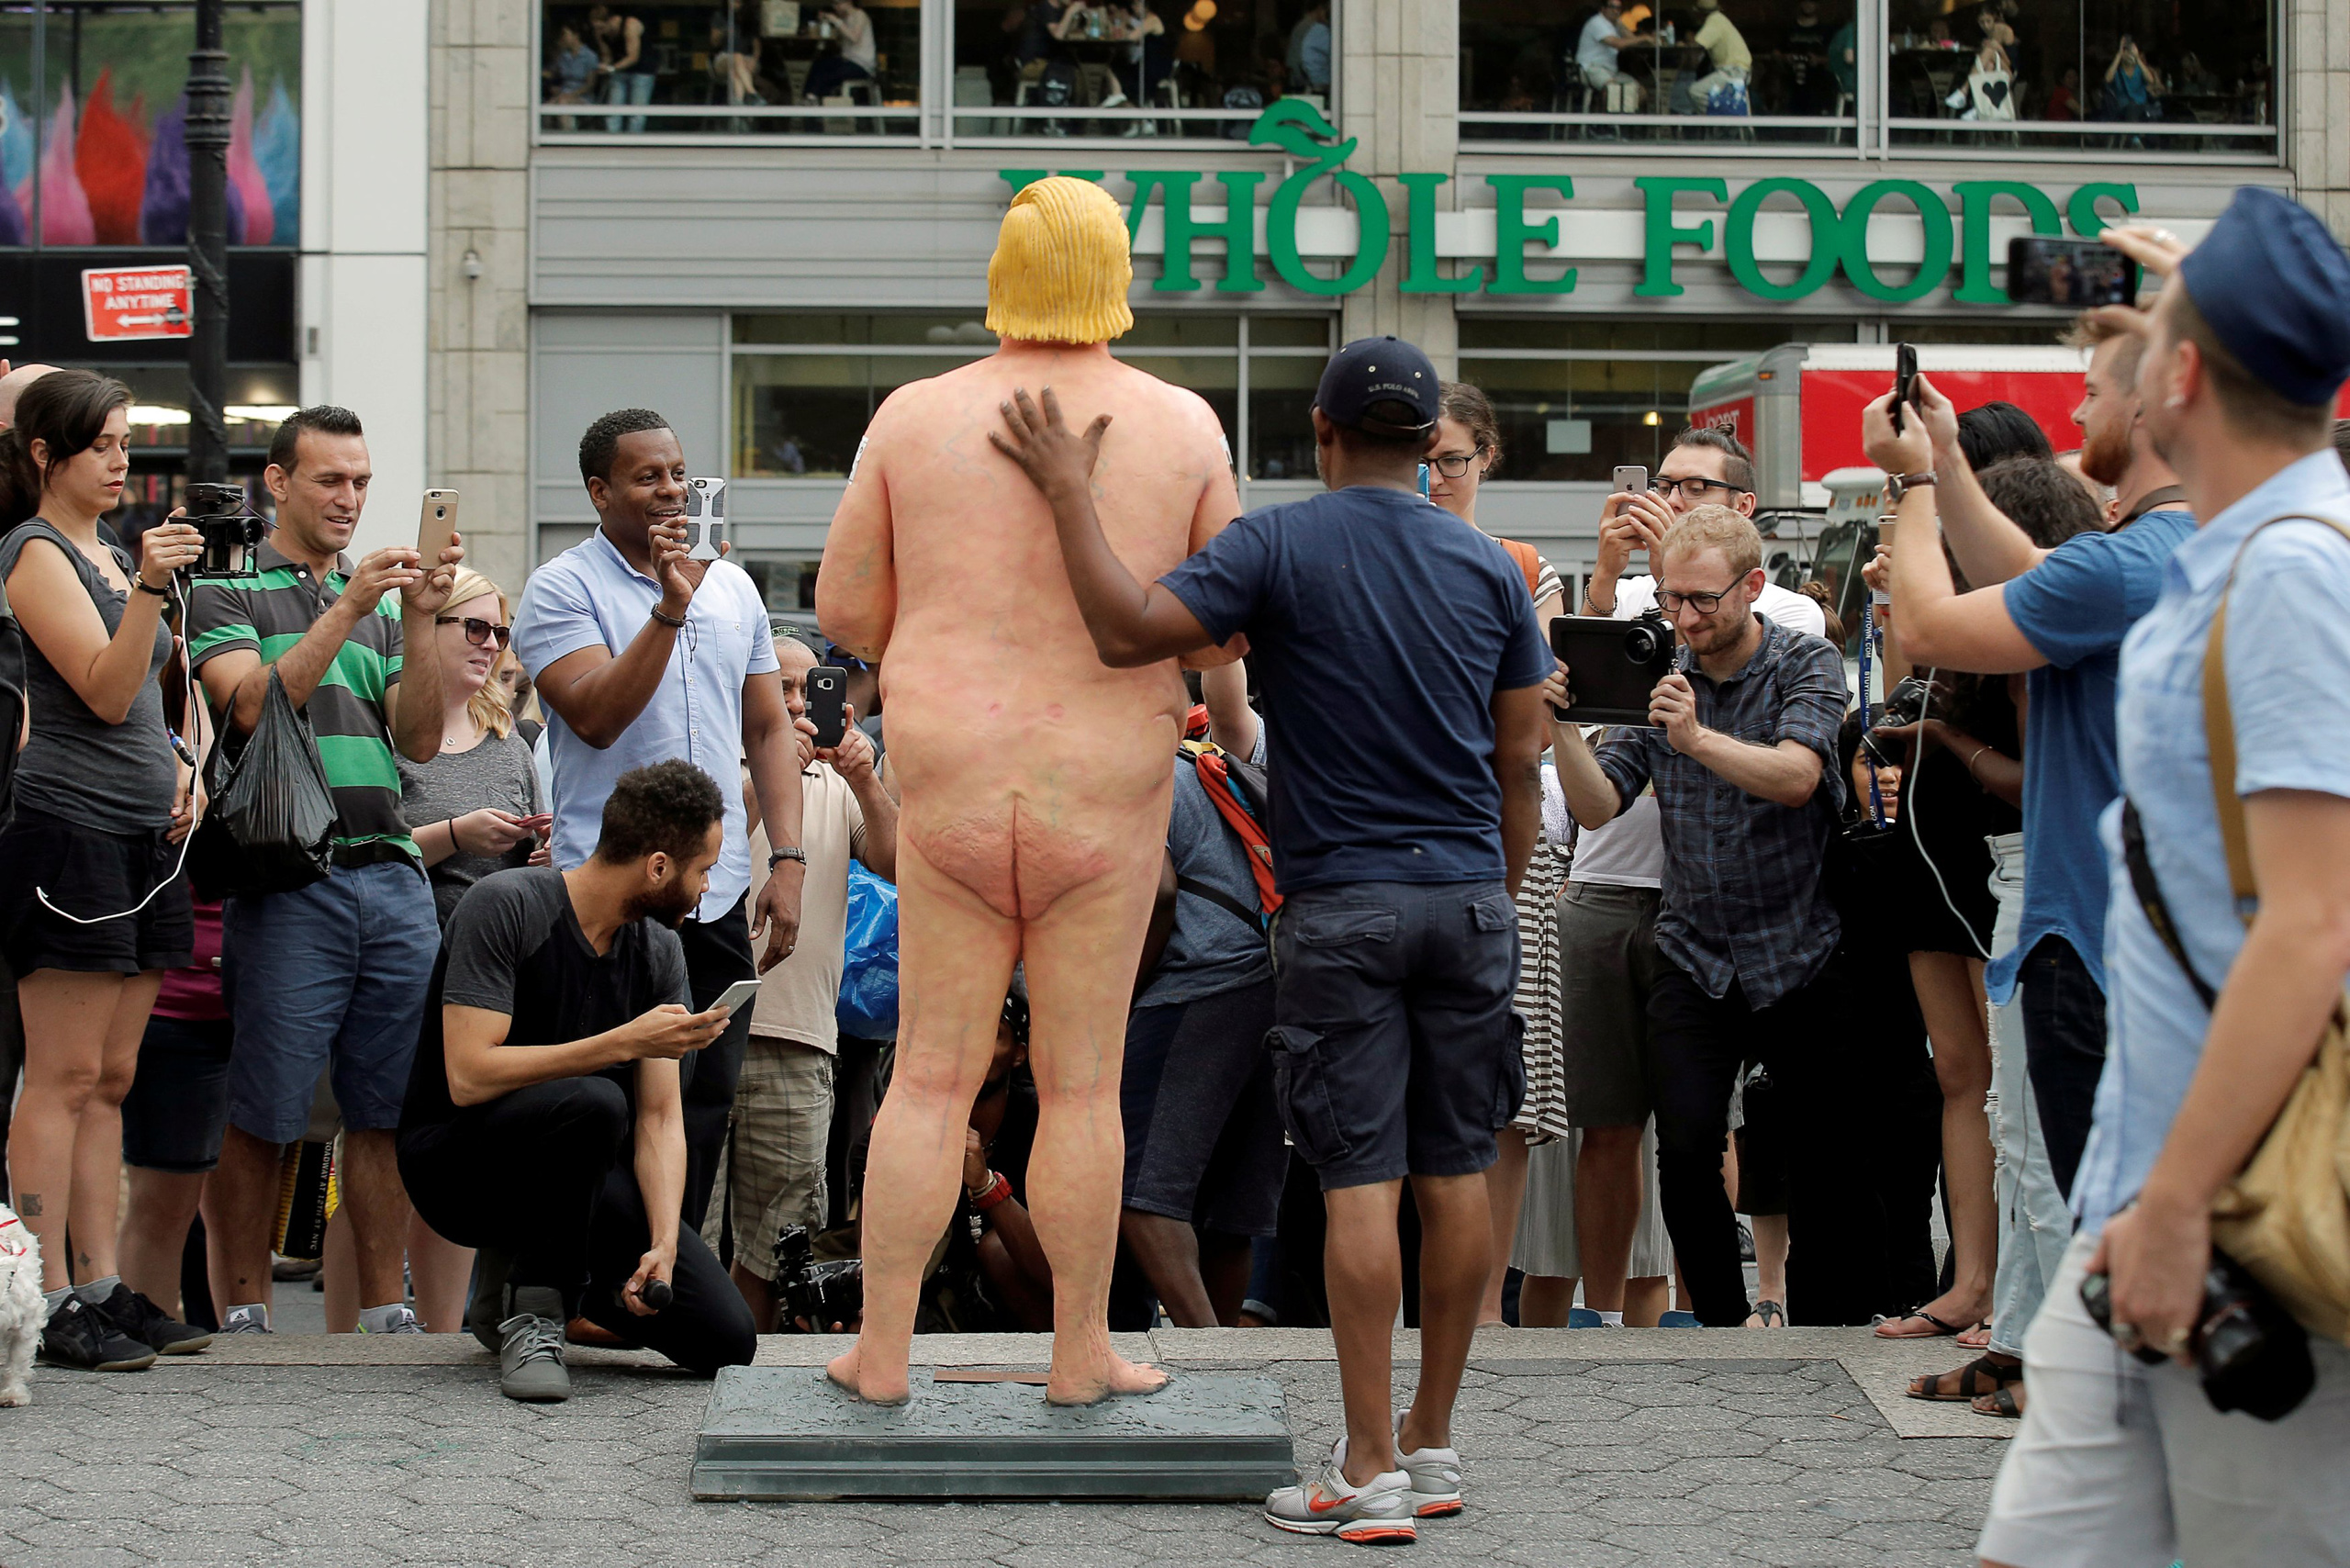 People photograph a naked statue of Republican U.S. presidential nominee Donald Trump that was left in Union Square Park in New York